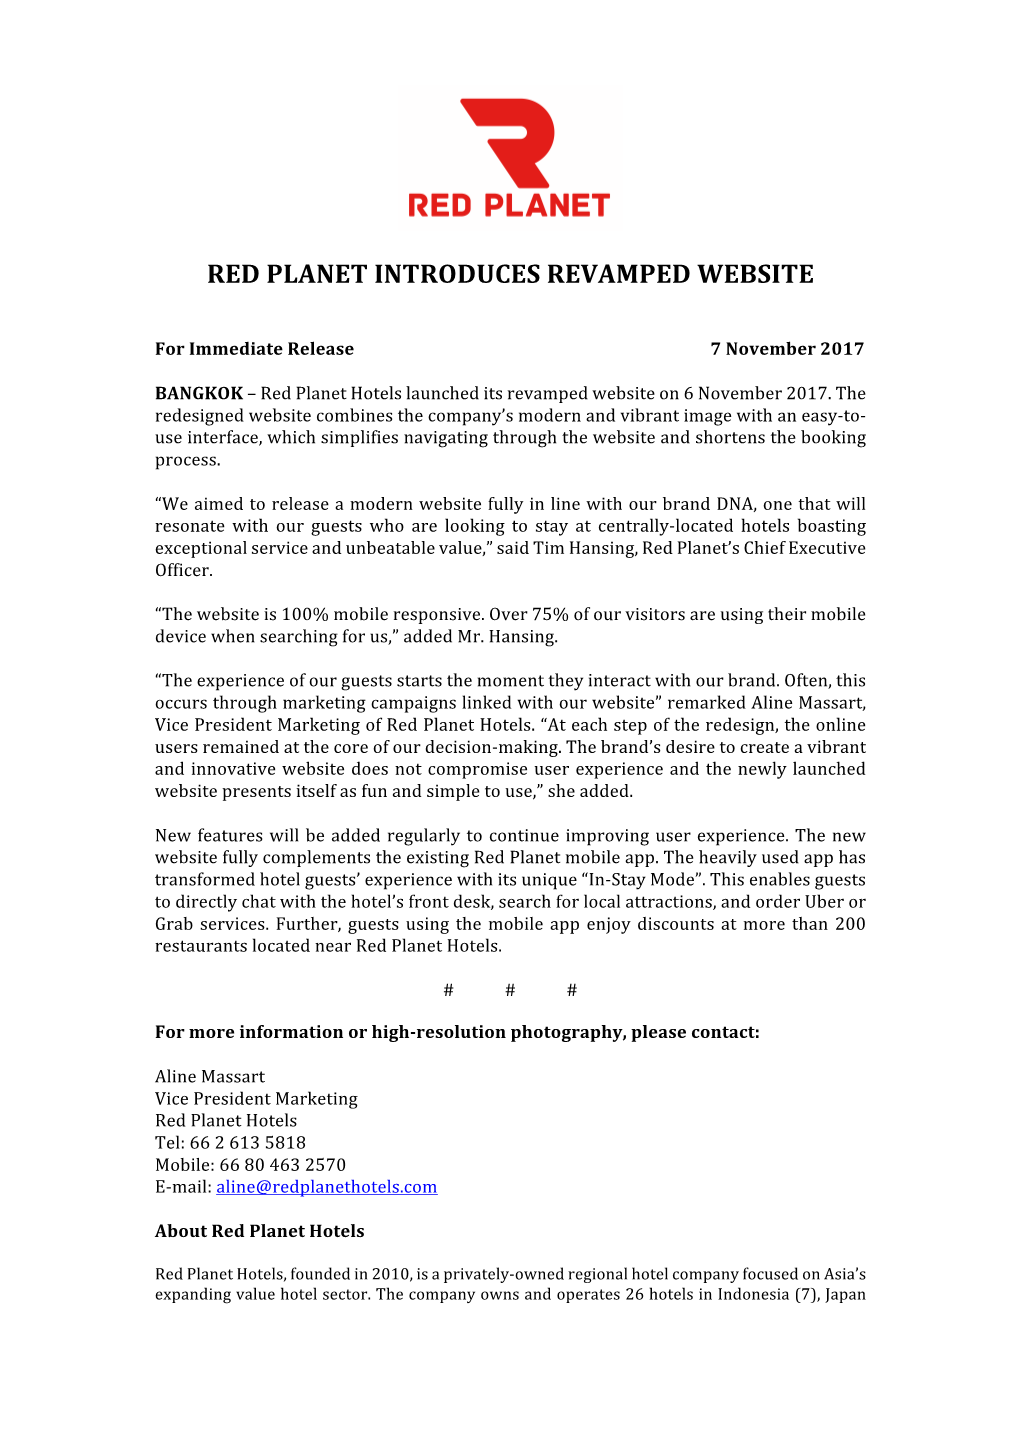 Red Planet Introduces Revamped Website